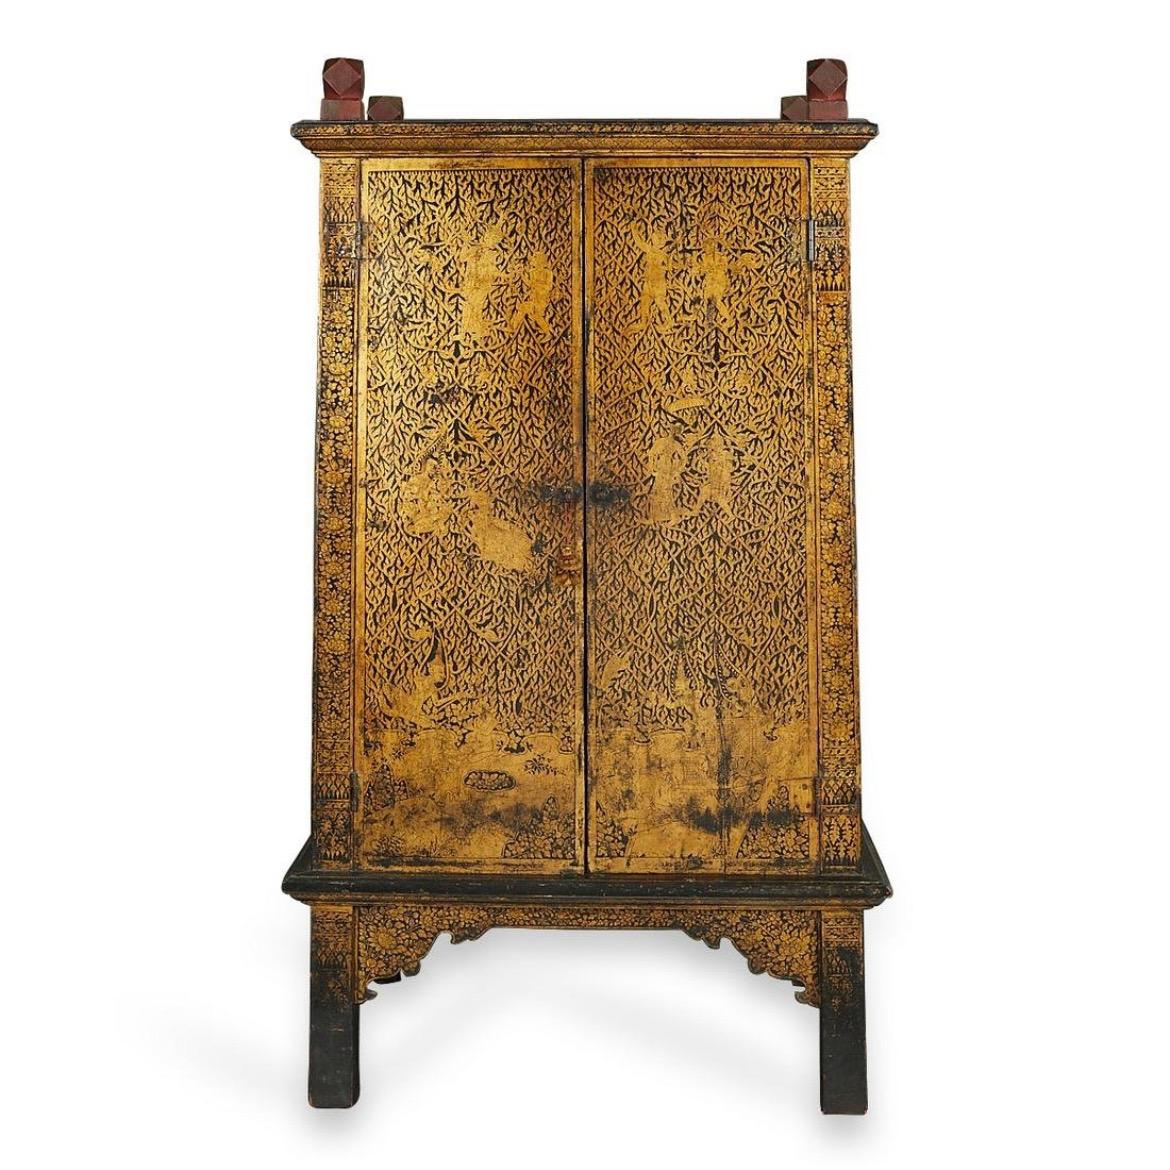 Large Antique Thai Buddhist Manuscript Storage Cabinet. A tapering upright cabinet made of teak with black lacquered exterior and red interior. The decoration of gold on a black ground on three sides is created by the Lai Rot Nam tradition of